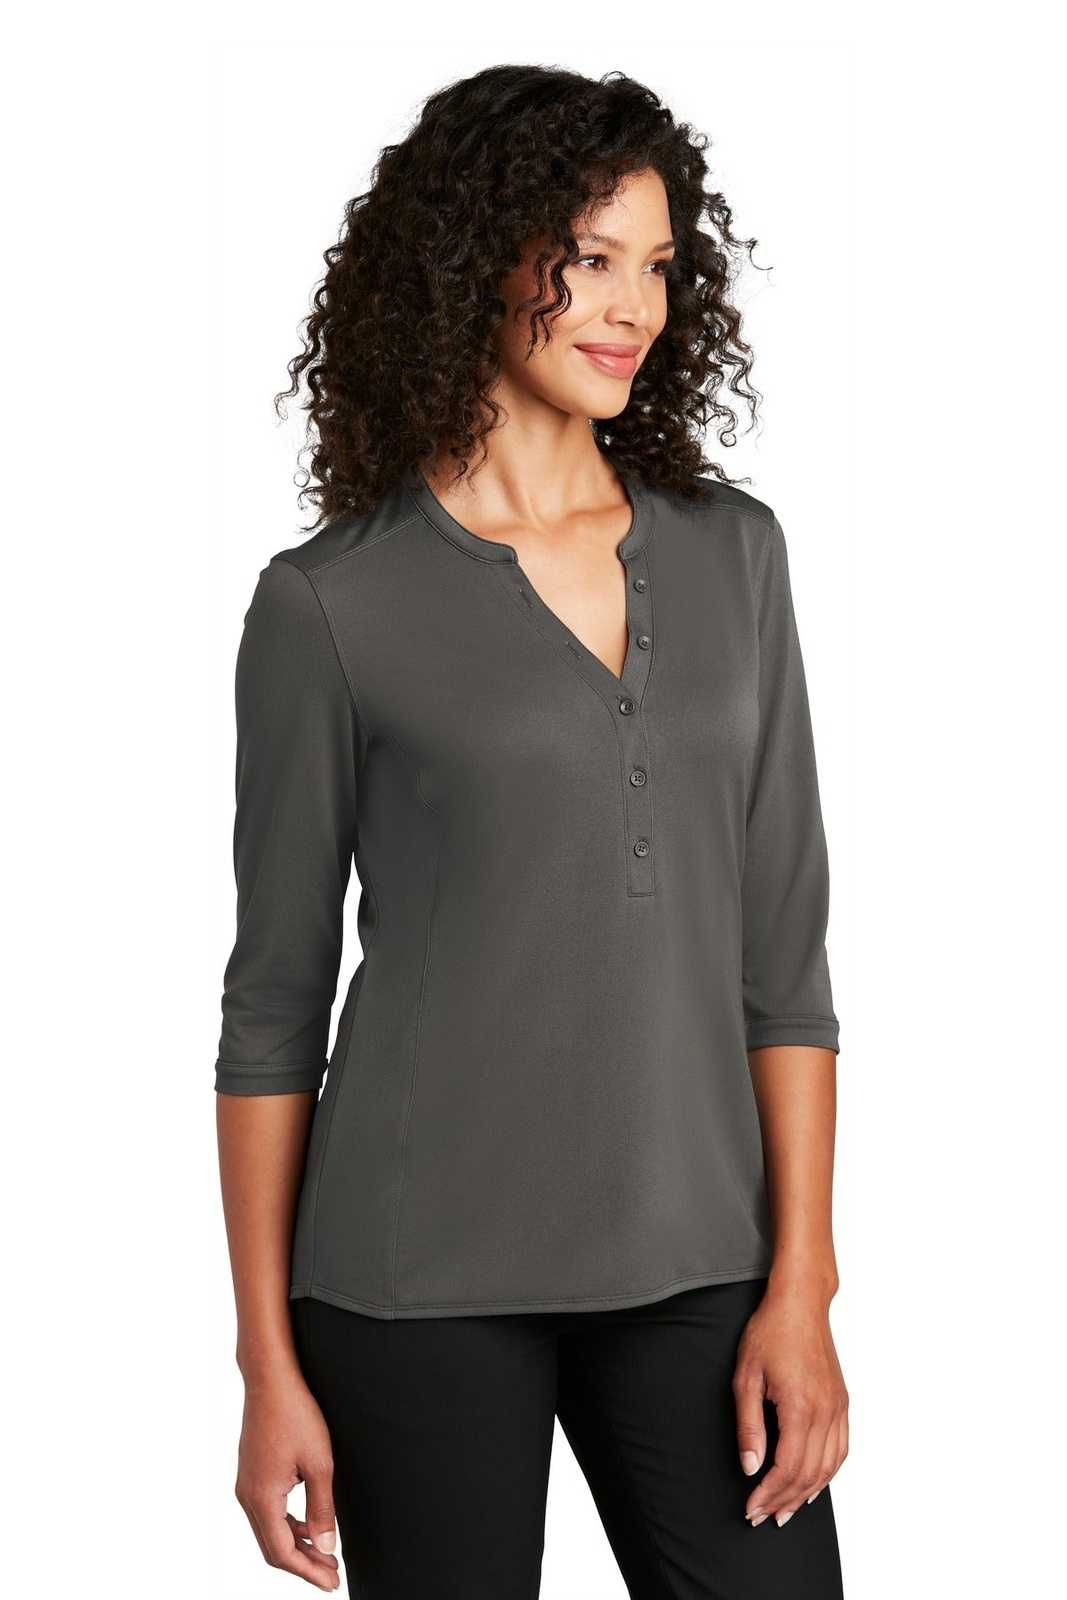 Port Authority LK750 Ladies UV Choice Pique Henley - Sterling Gray - HIT a Double - 4